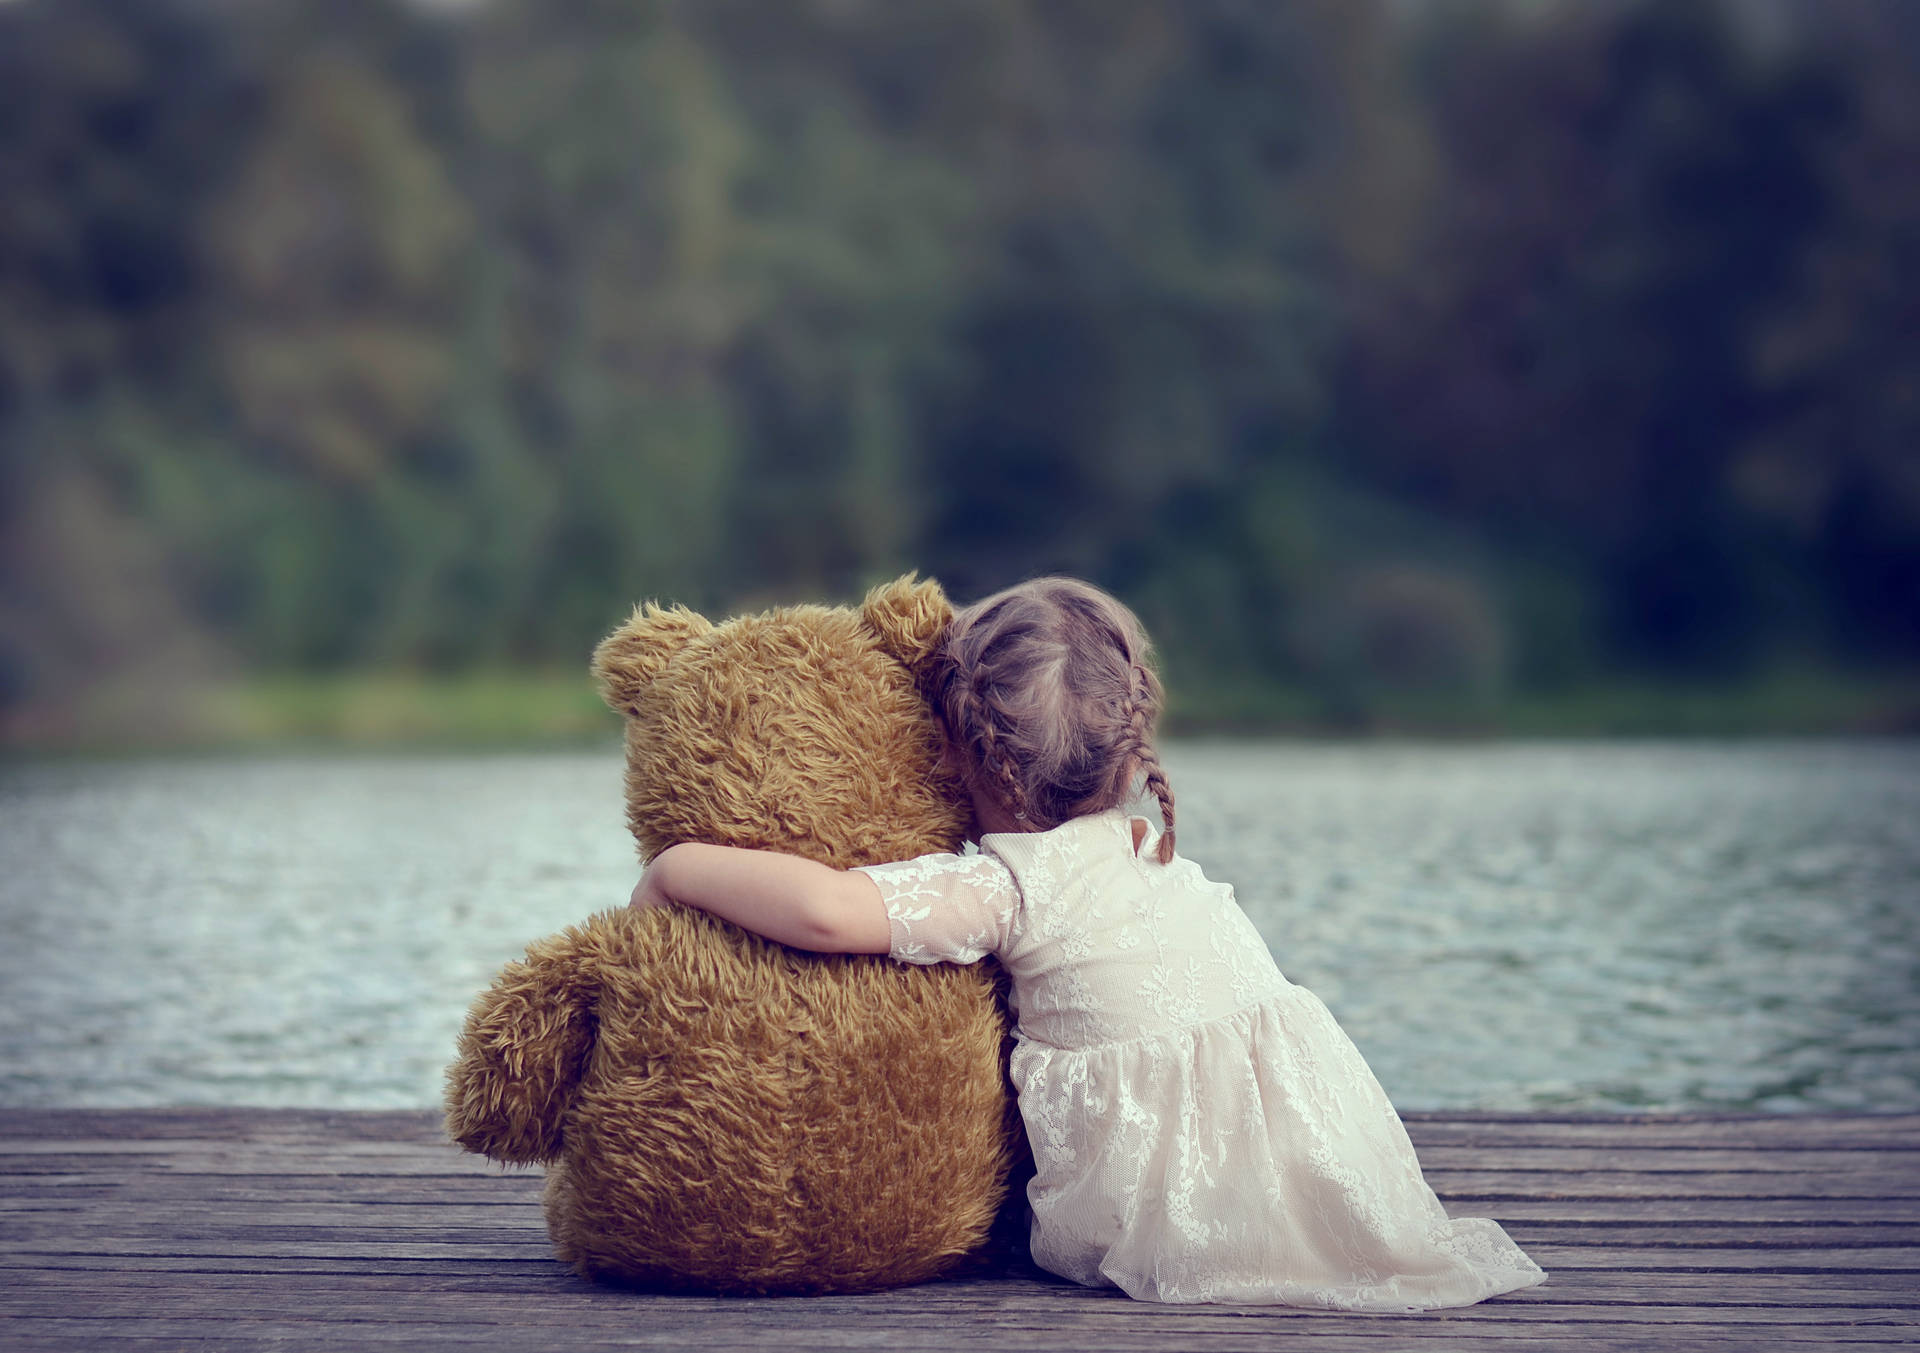 Barnsom Kramar En Teddybjörn. (this Would Be A Caption For A Wallpaper With An Image Of A Child Hugging A Teddy Bear.) Wallpaper